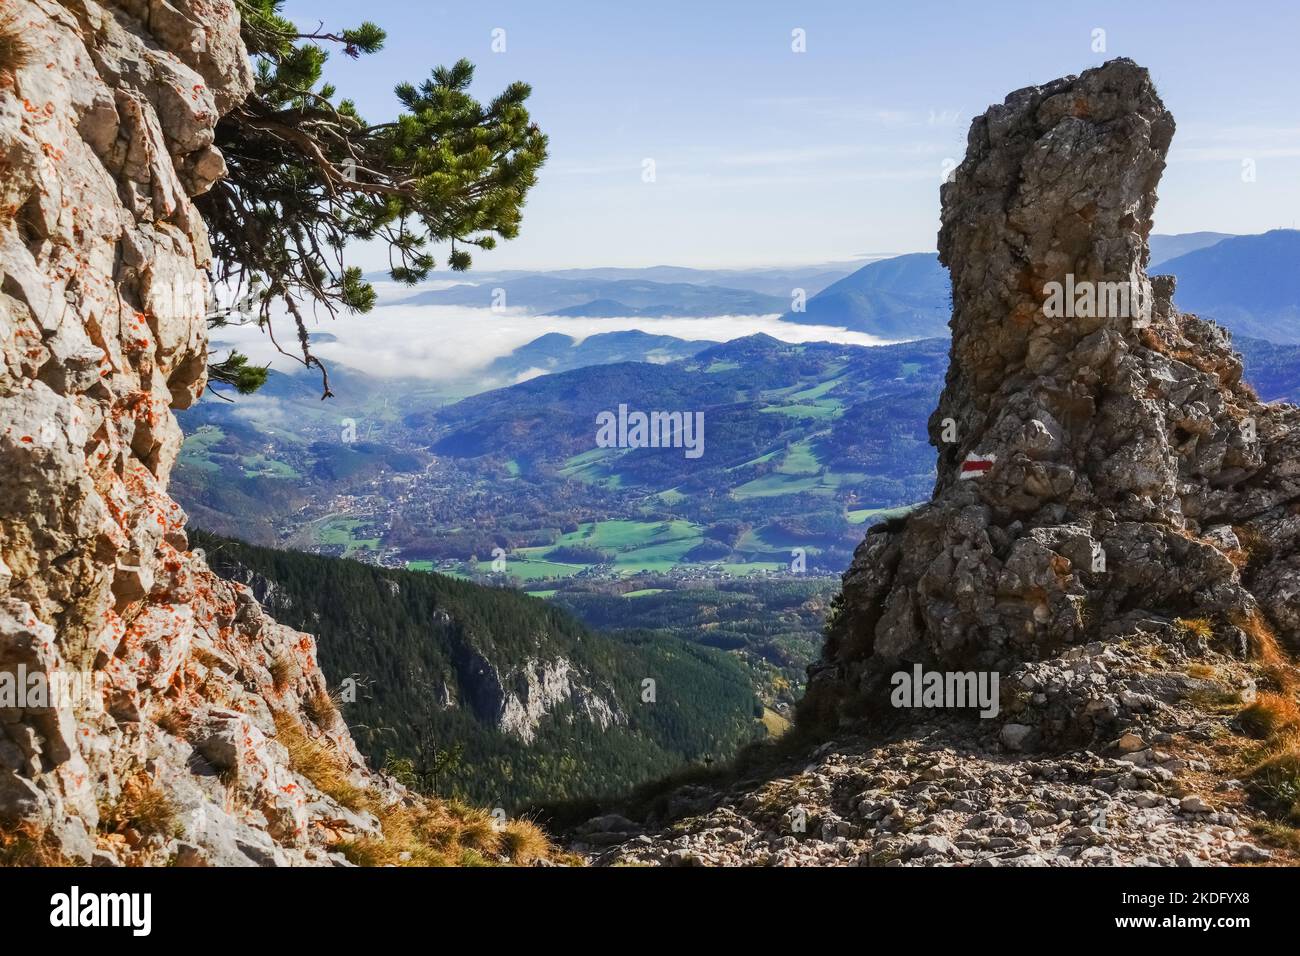 amazing rocky passage during hiking to the highest mountain of lower austria Stock Photo